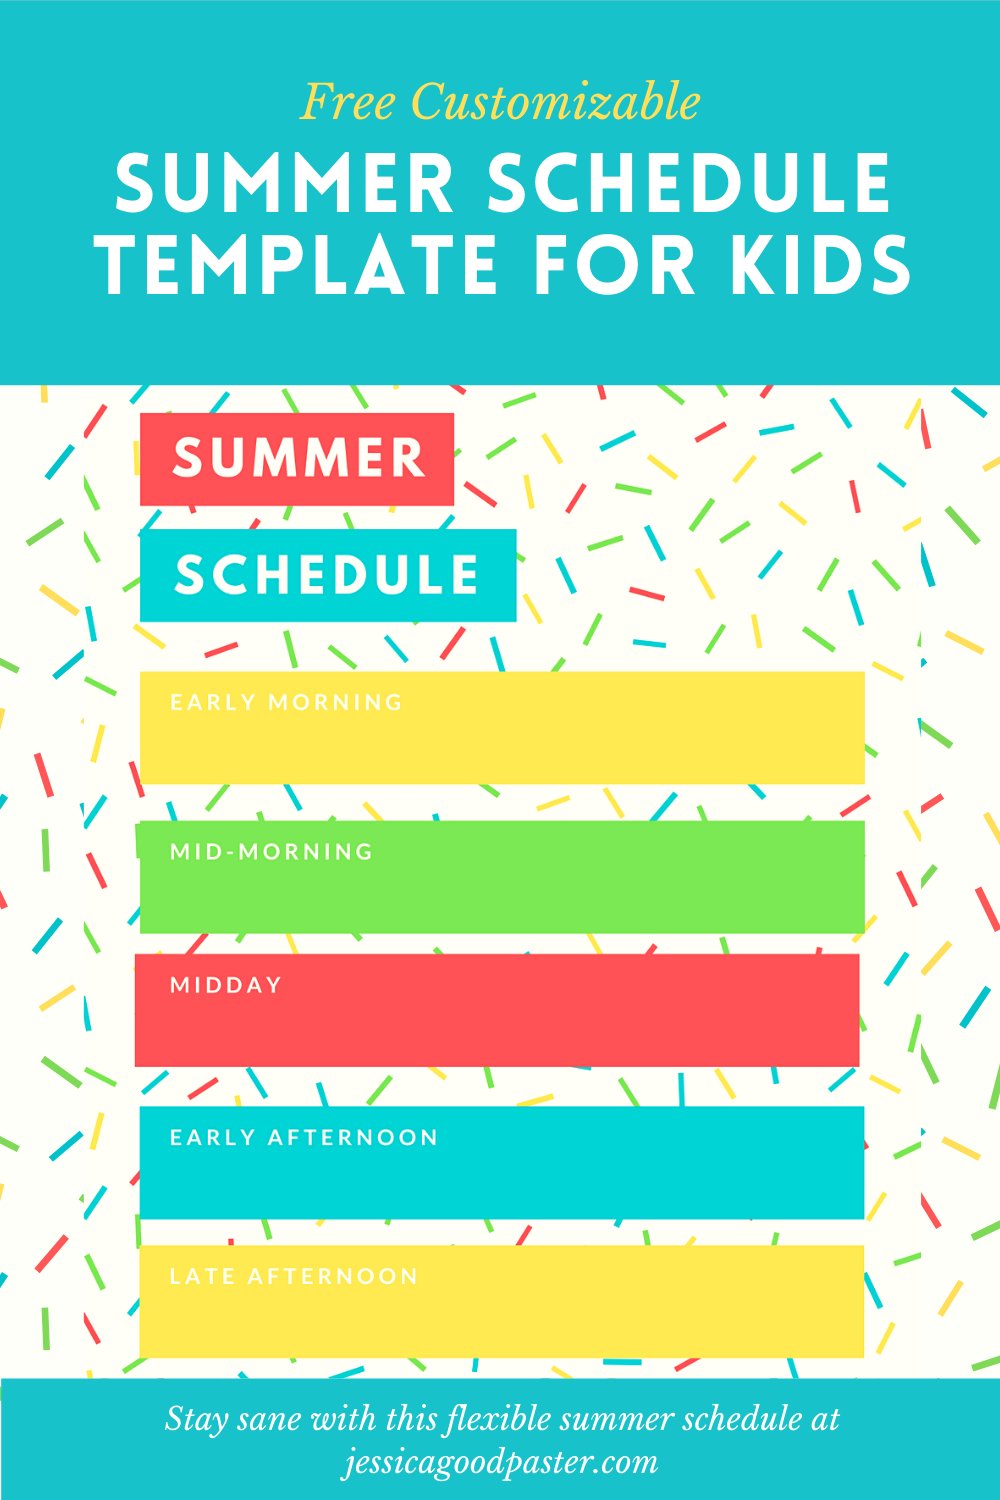 Save your sanity this summer with this customizable, free printable summer schedule template for kids. This flexible daily schedule works for toddlers, preschoolers, elementary kids, and beyond. Plus, get ideas for activities, chores, outside time, playing with siblings, and more. 